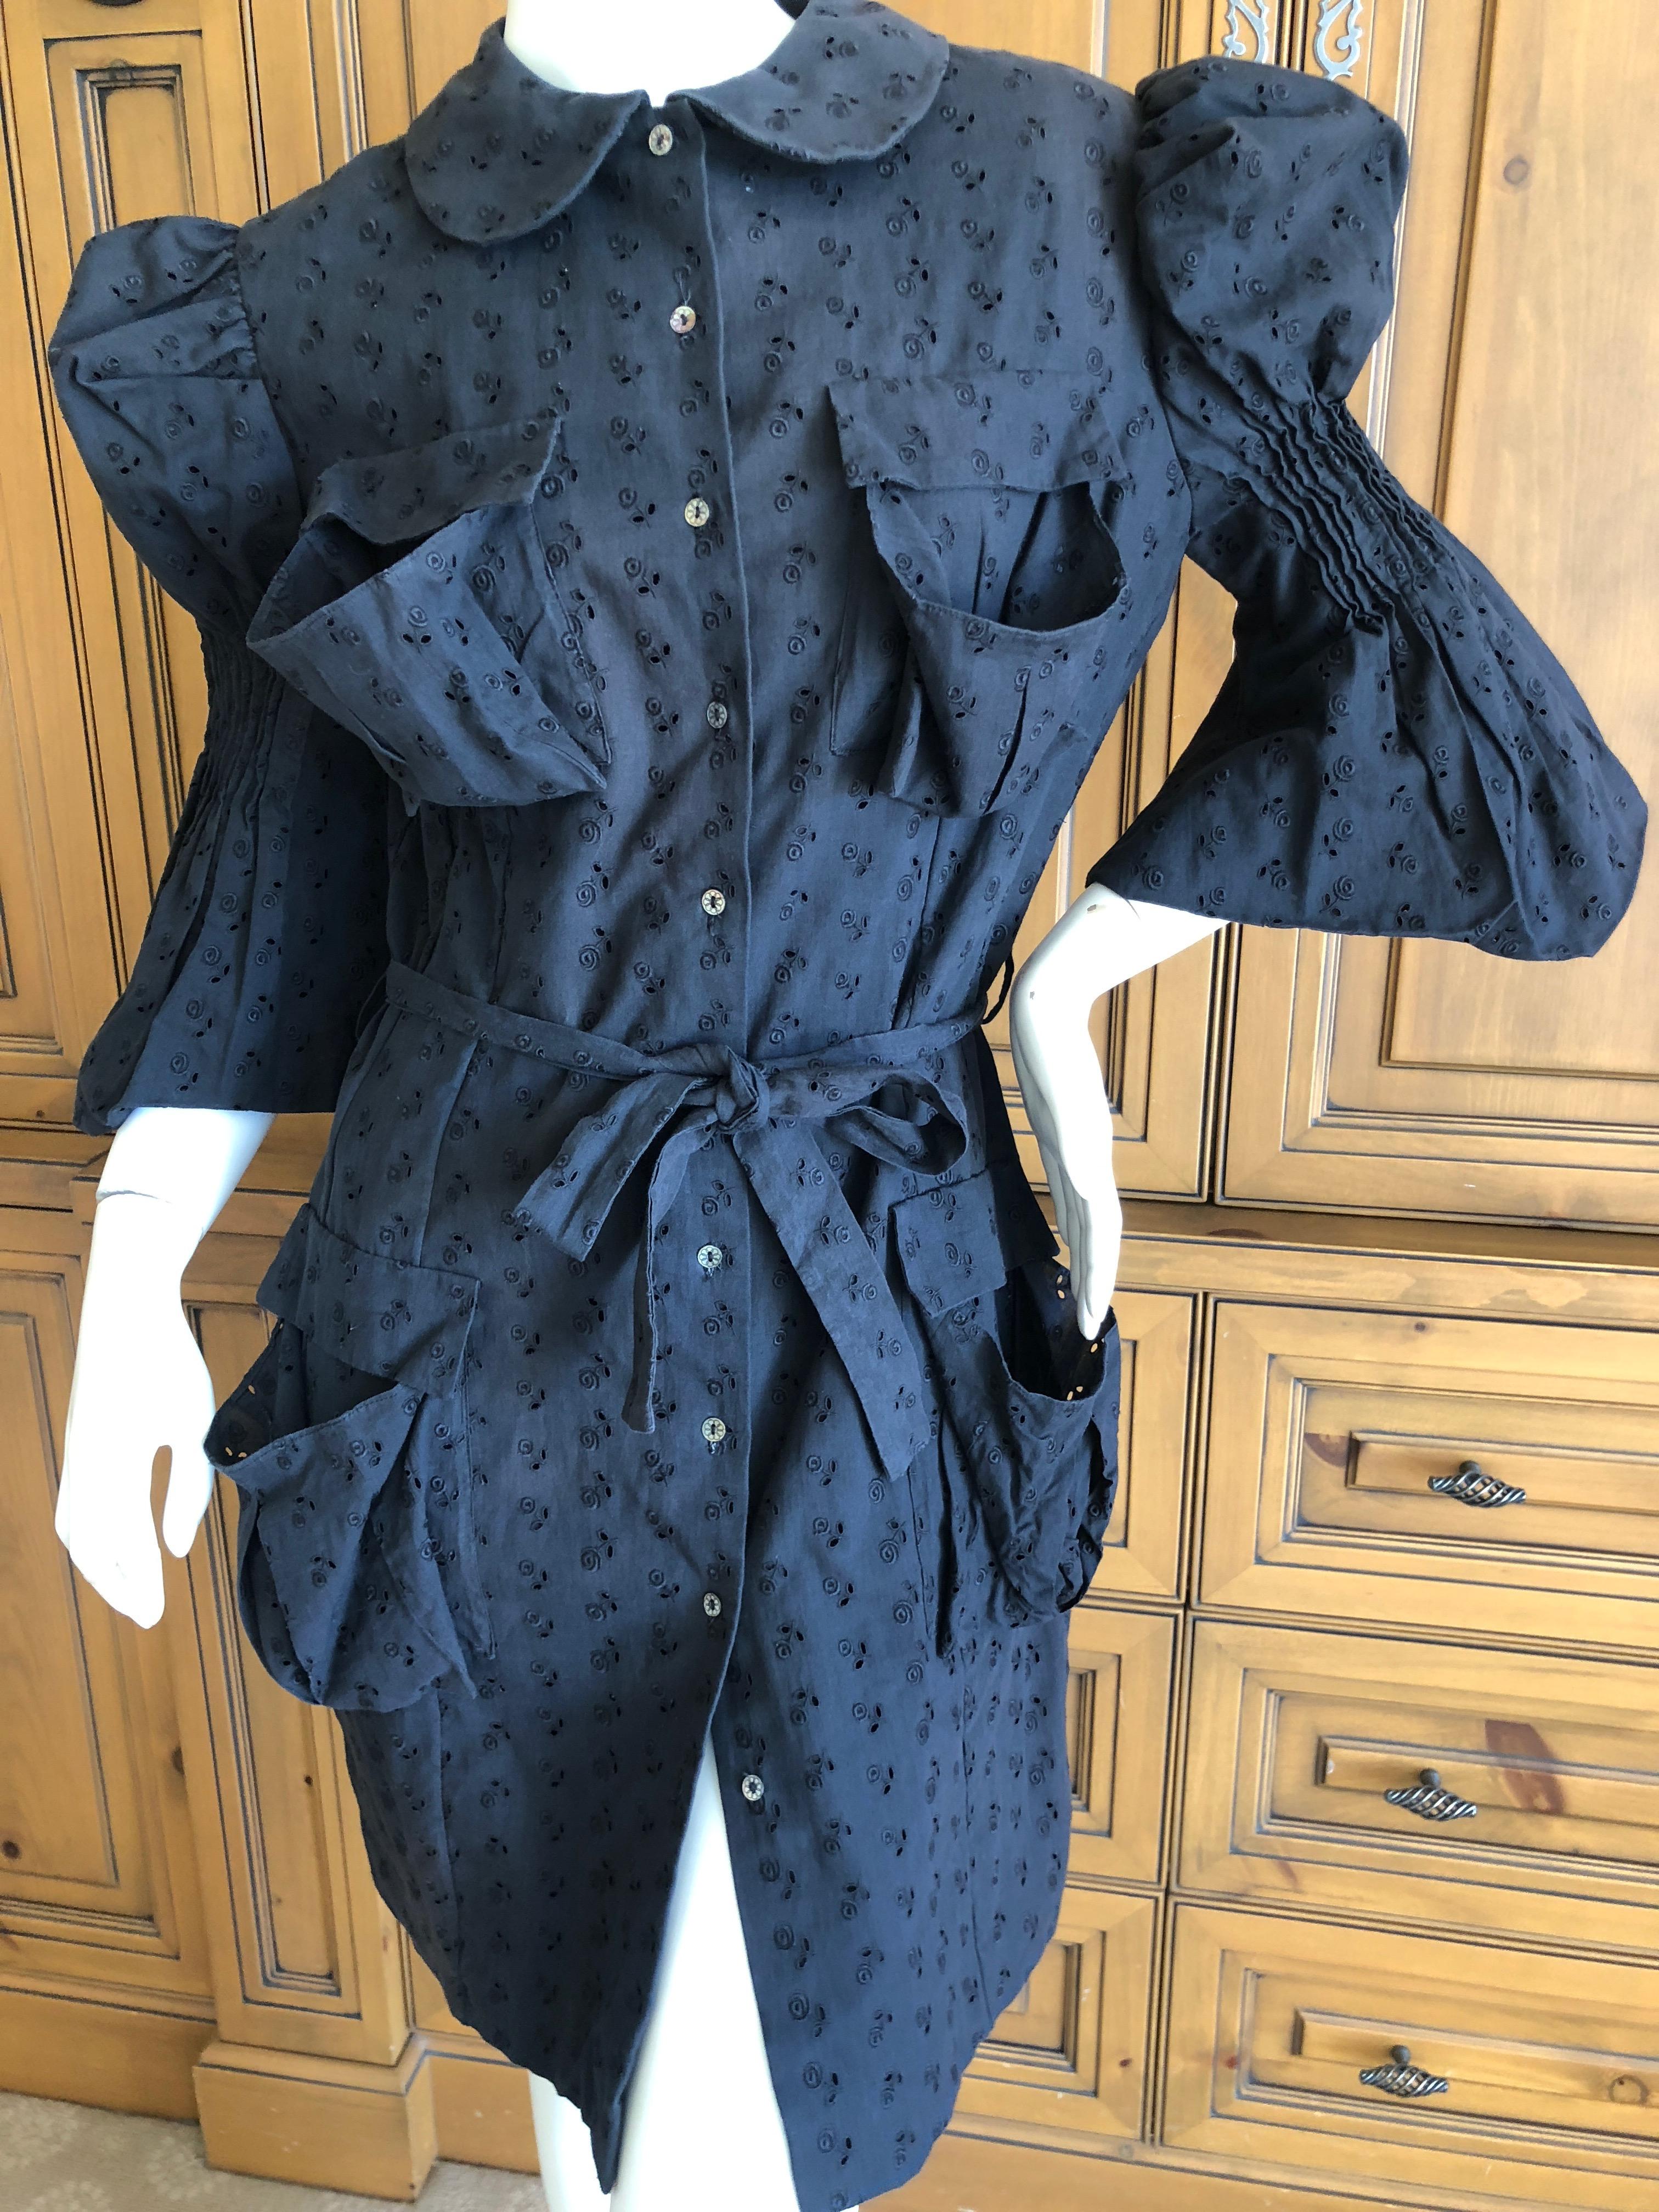  John Galliano 1998 Black Belted Cotton Eyelet Dress with Leg of Mutton Sleeves 1